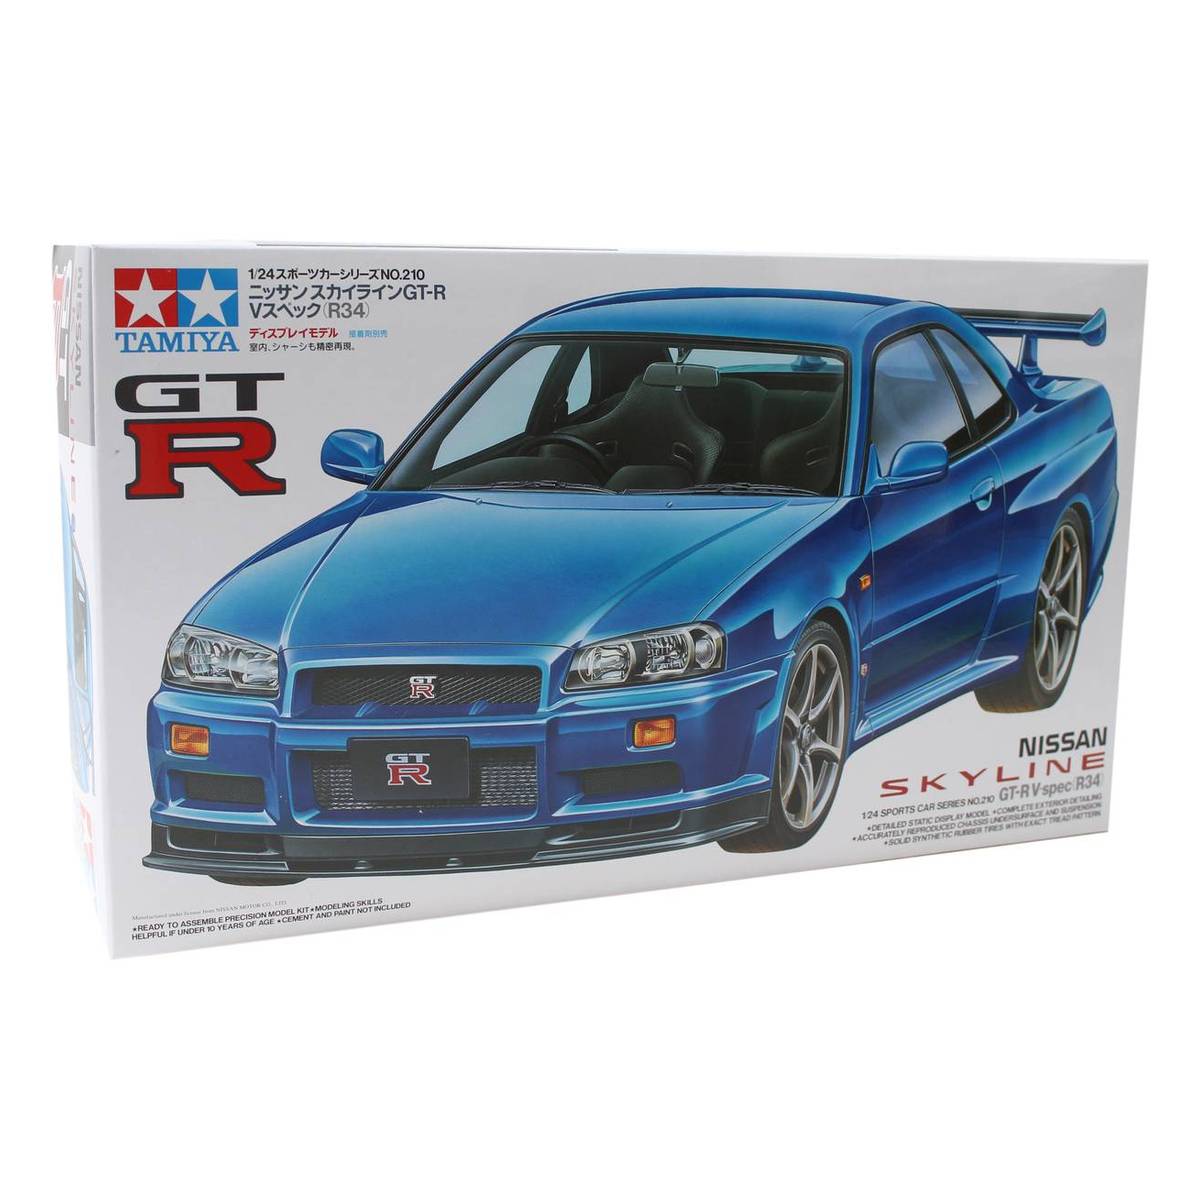 Nissan Skyline GT-R R34 review, interesting facts, and photos